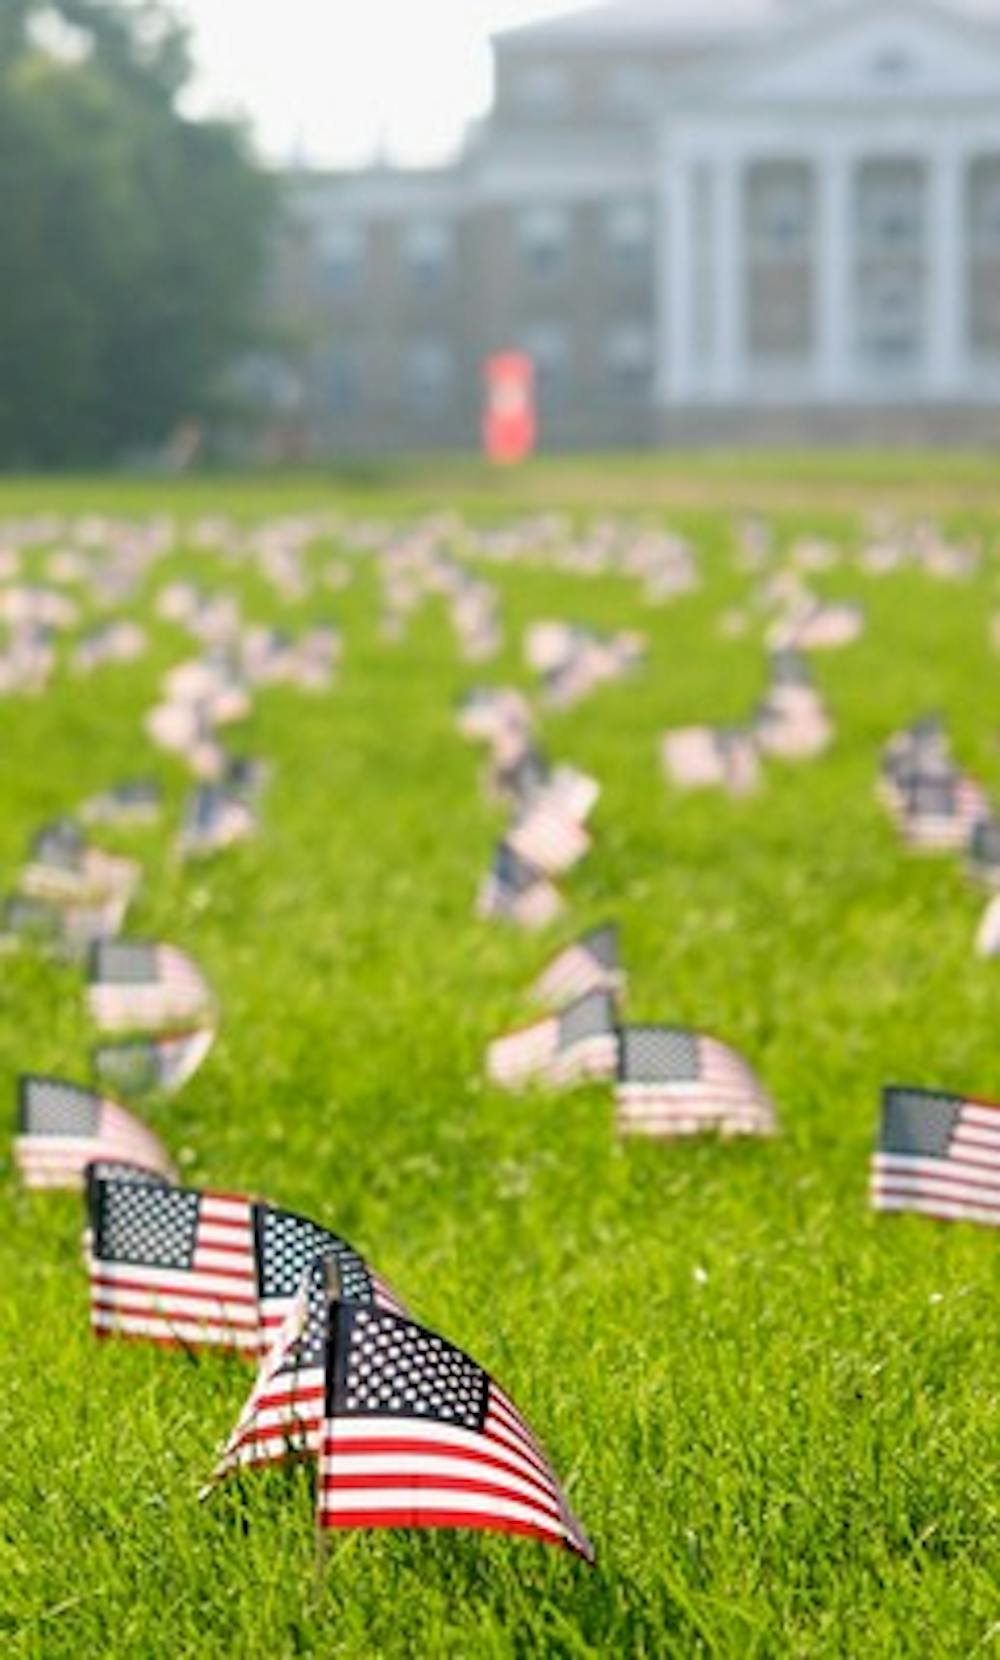 Student orgs. pay tribute to Sept. 11 victims